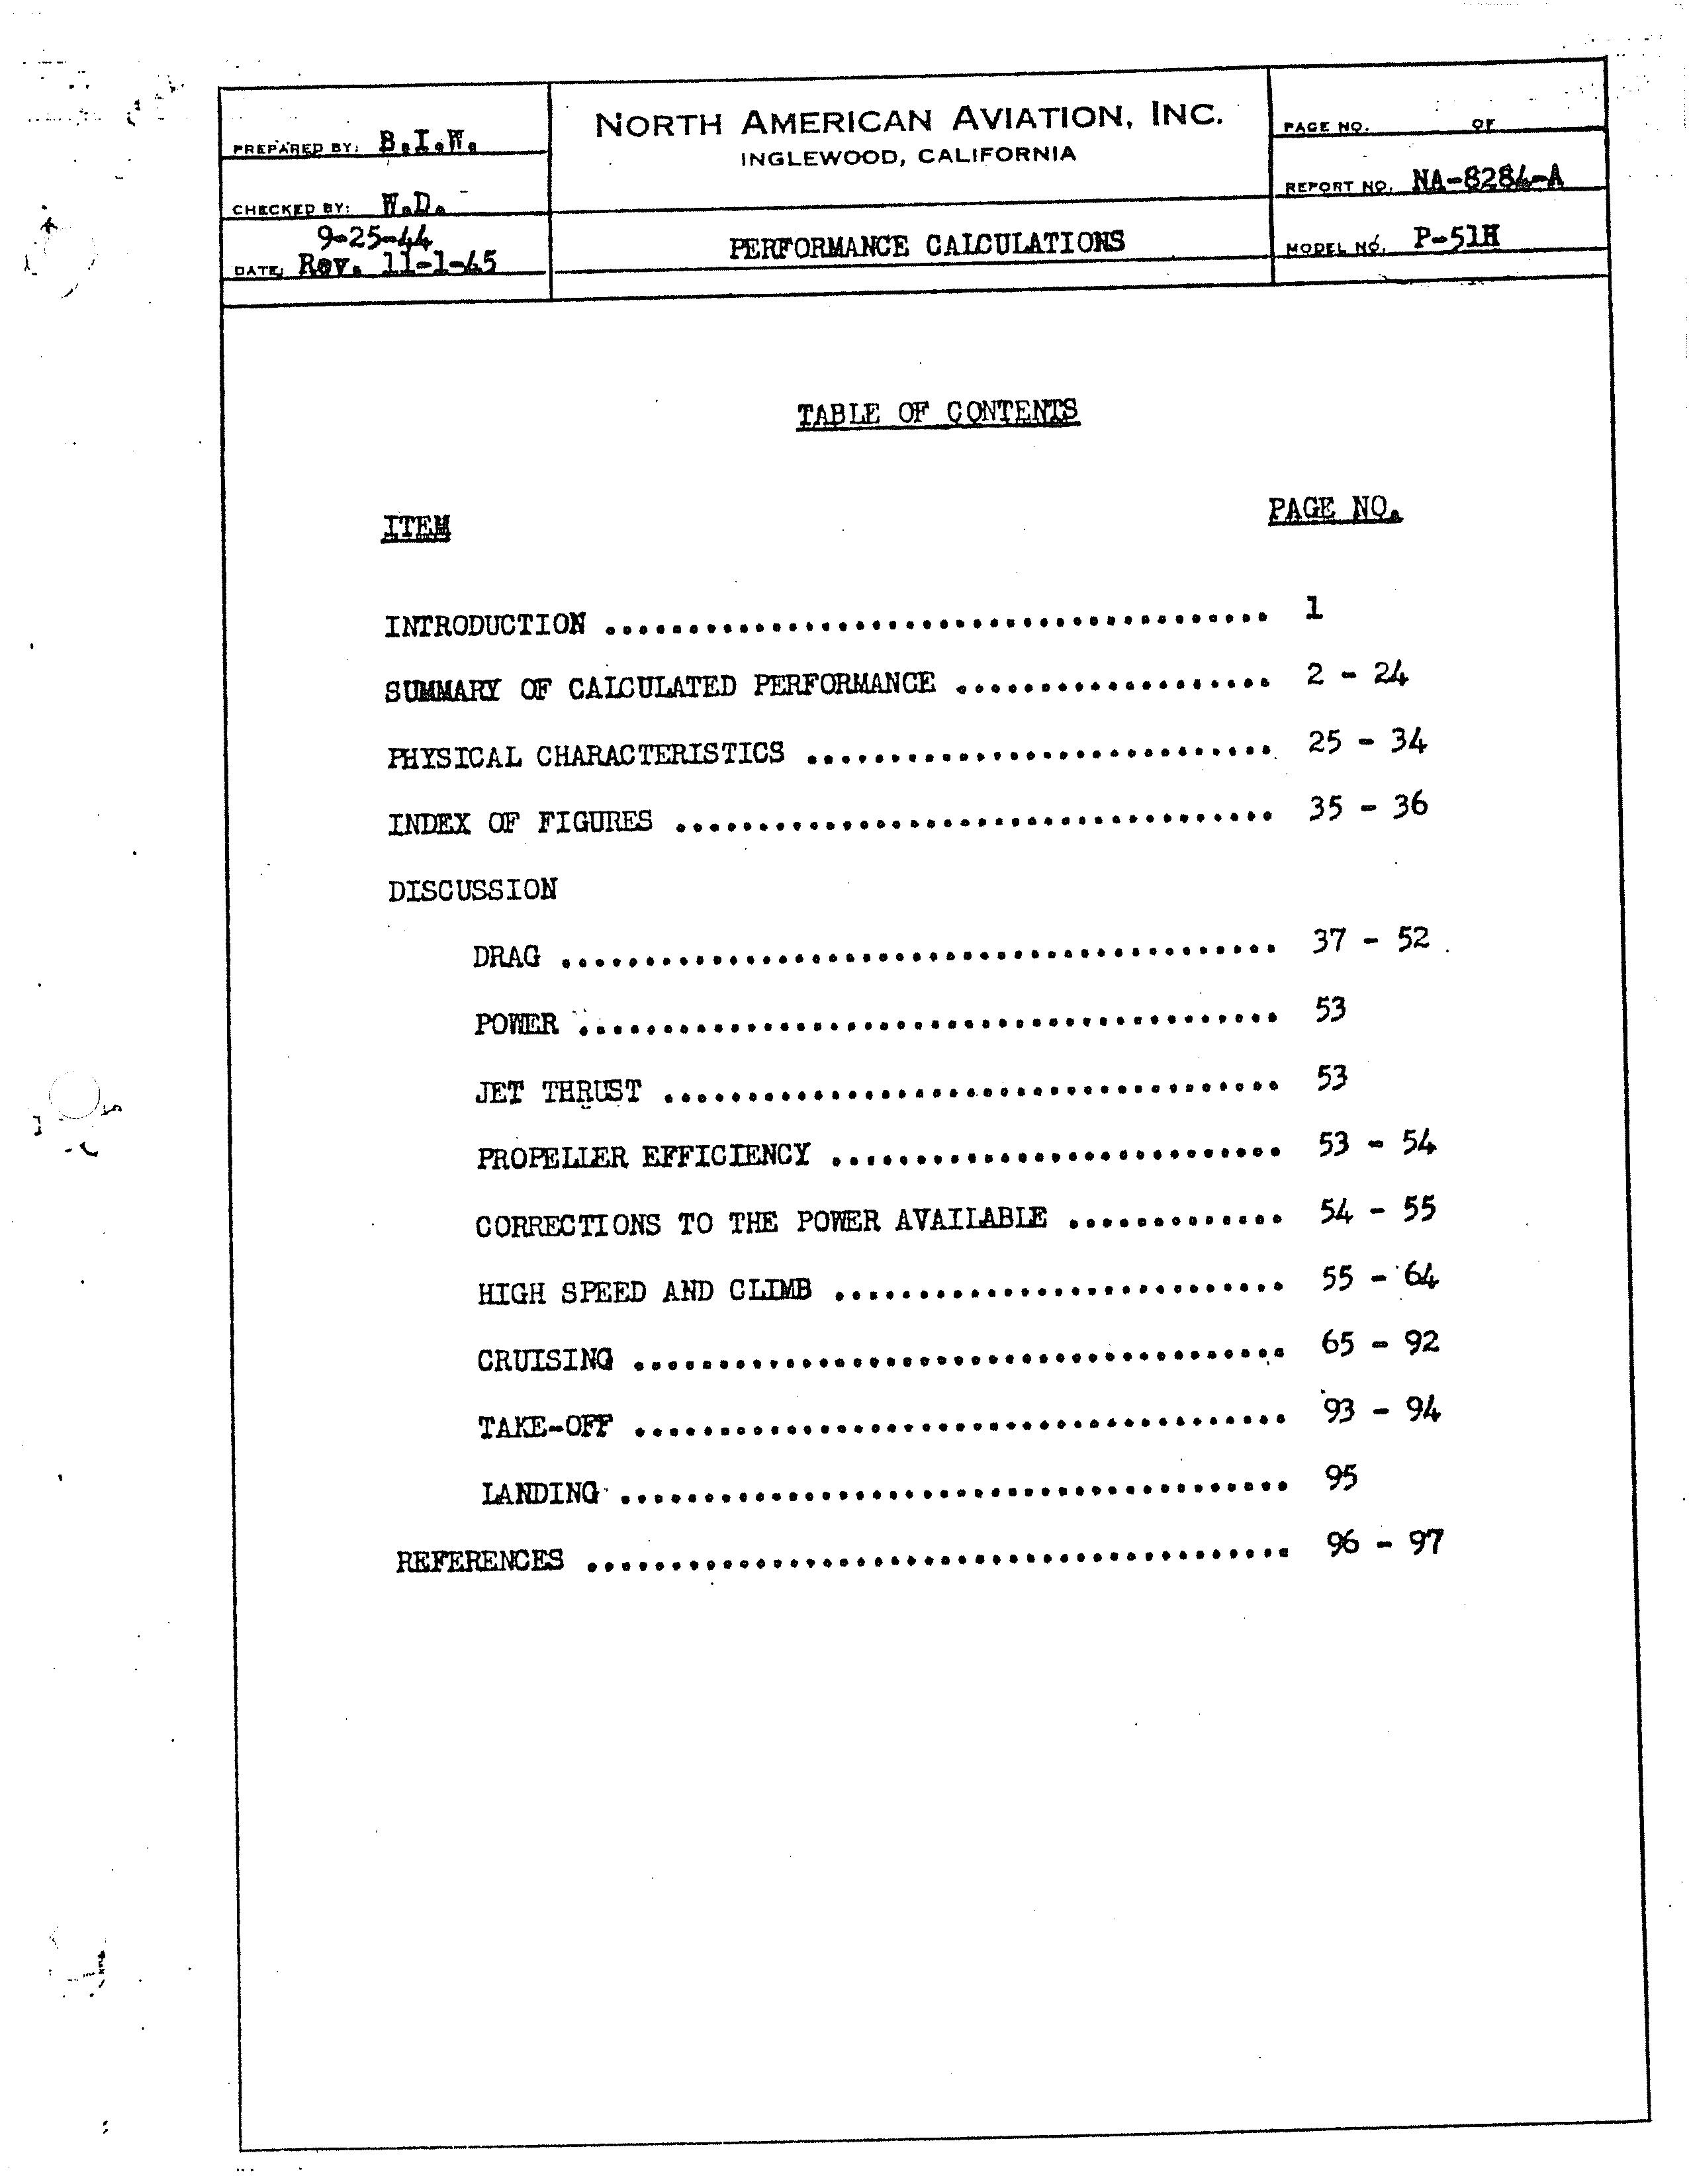 Sample page 3 from AirCorps Library document: Performance Calculations for P-51H (NA-126) Airplanes